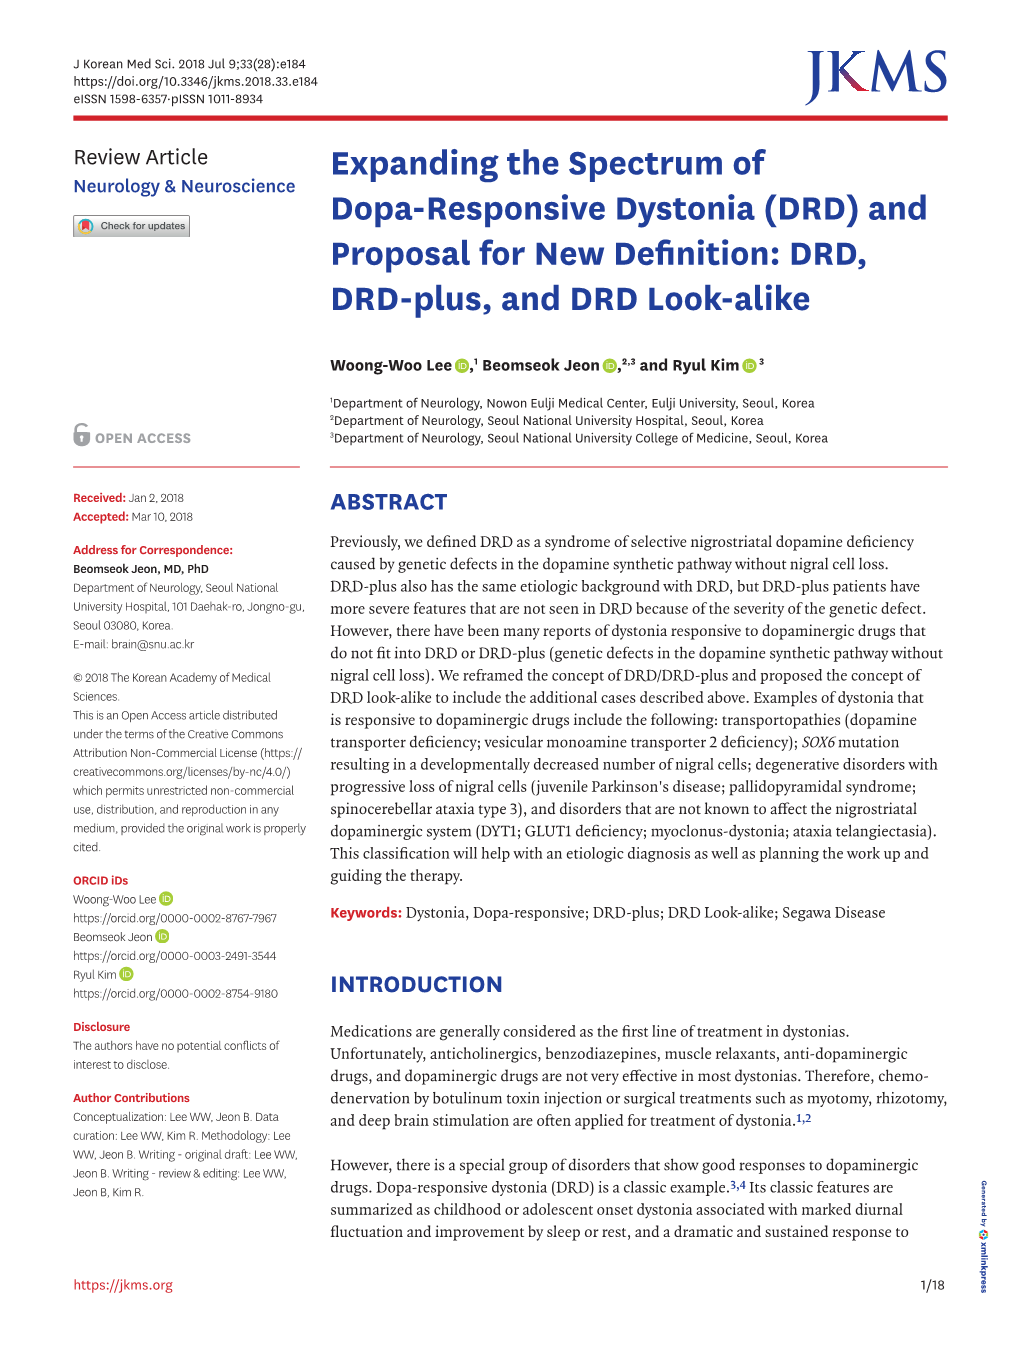 Expanding the Spectrum of Dopa-Responsive Dystonia (DRD)